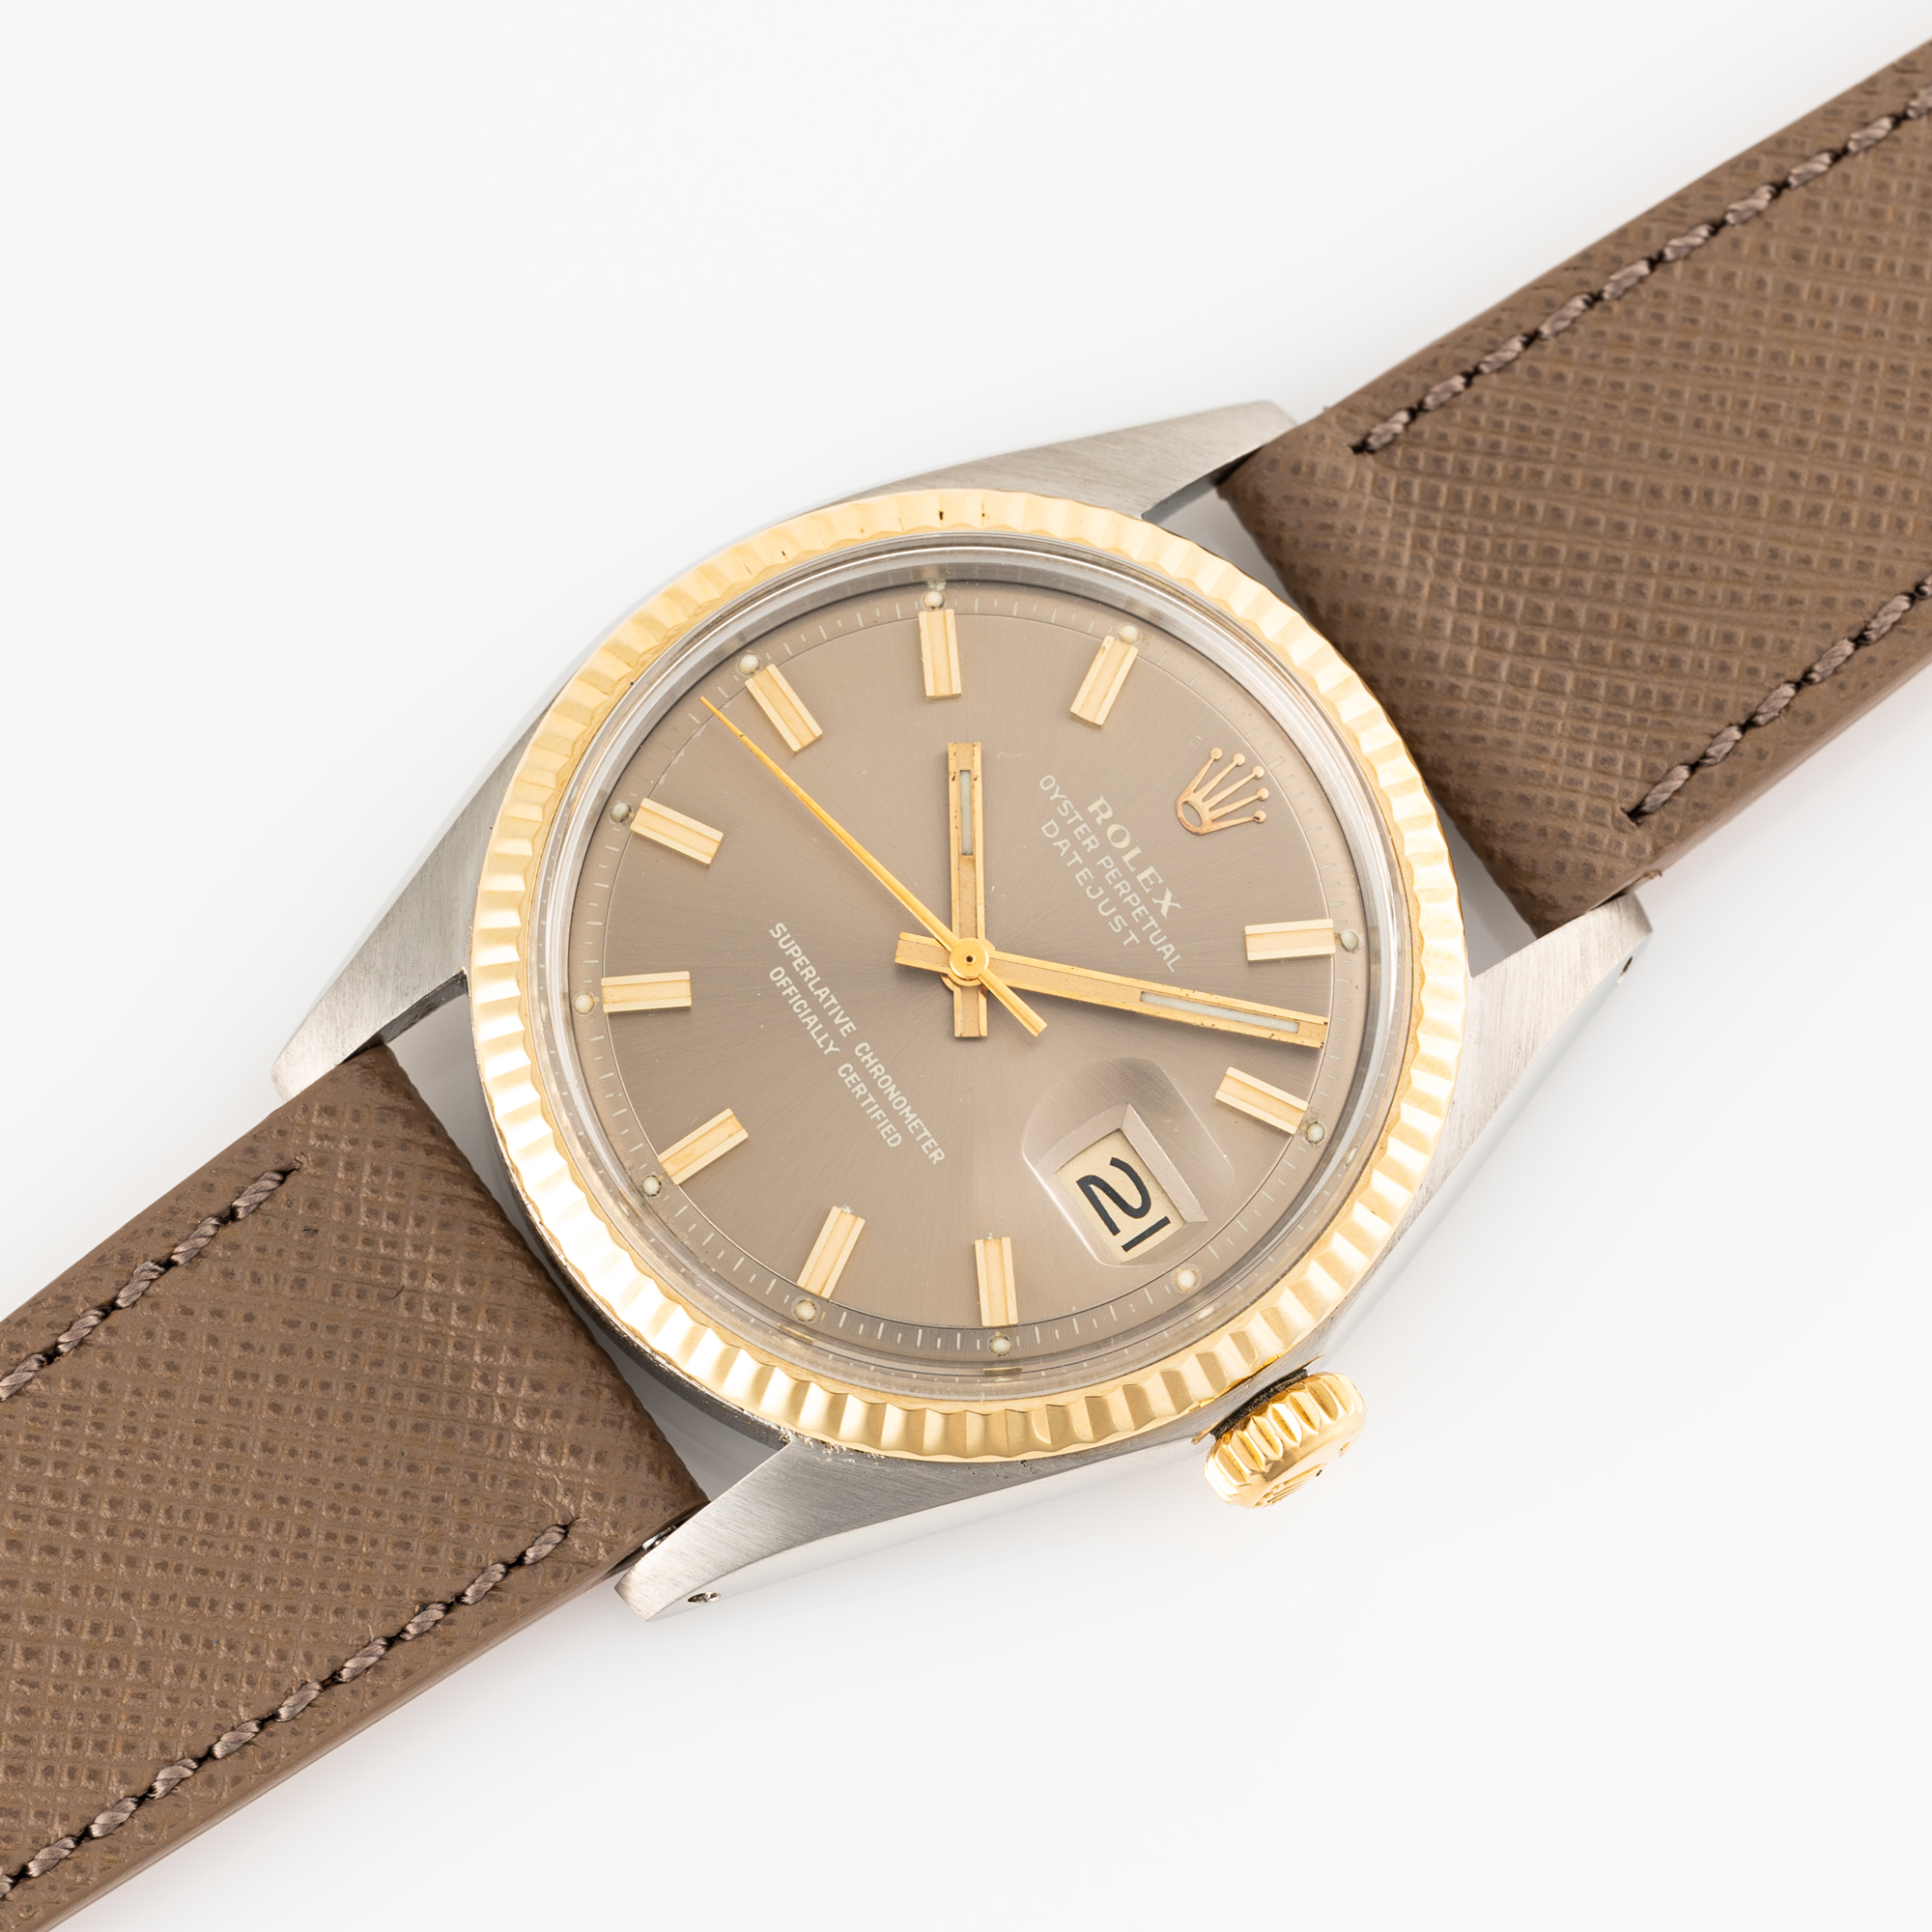 A GENTLEMAN'S SIZE STEEL & GOLD ROLEX OYSTER PERPETUAL DATEJUST WRIST WATCH CIRCA 1973, REF. 1601 - Image 3 of 7